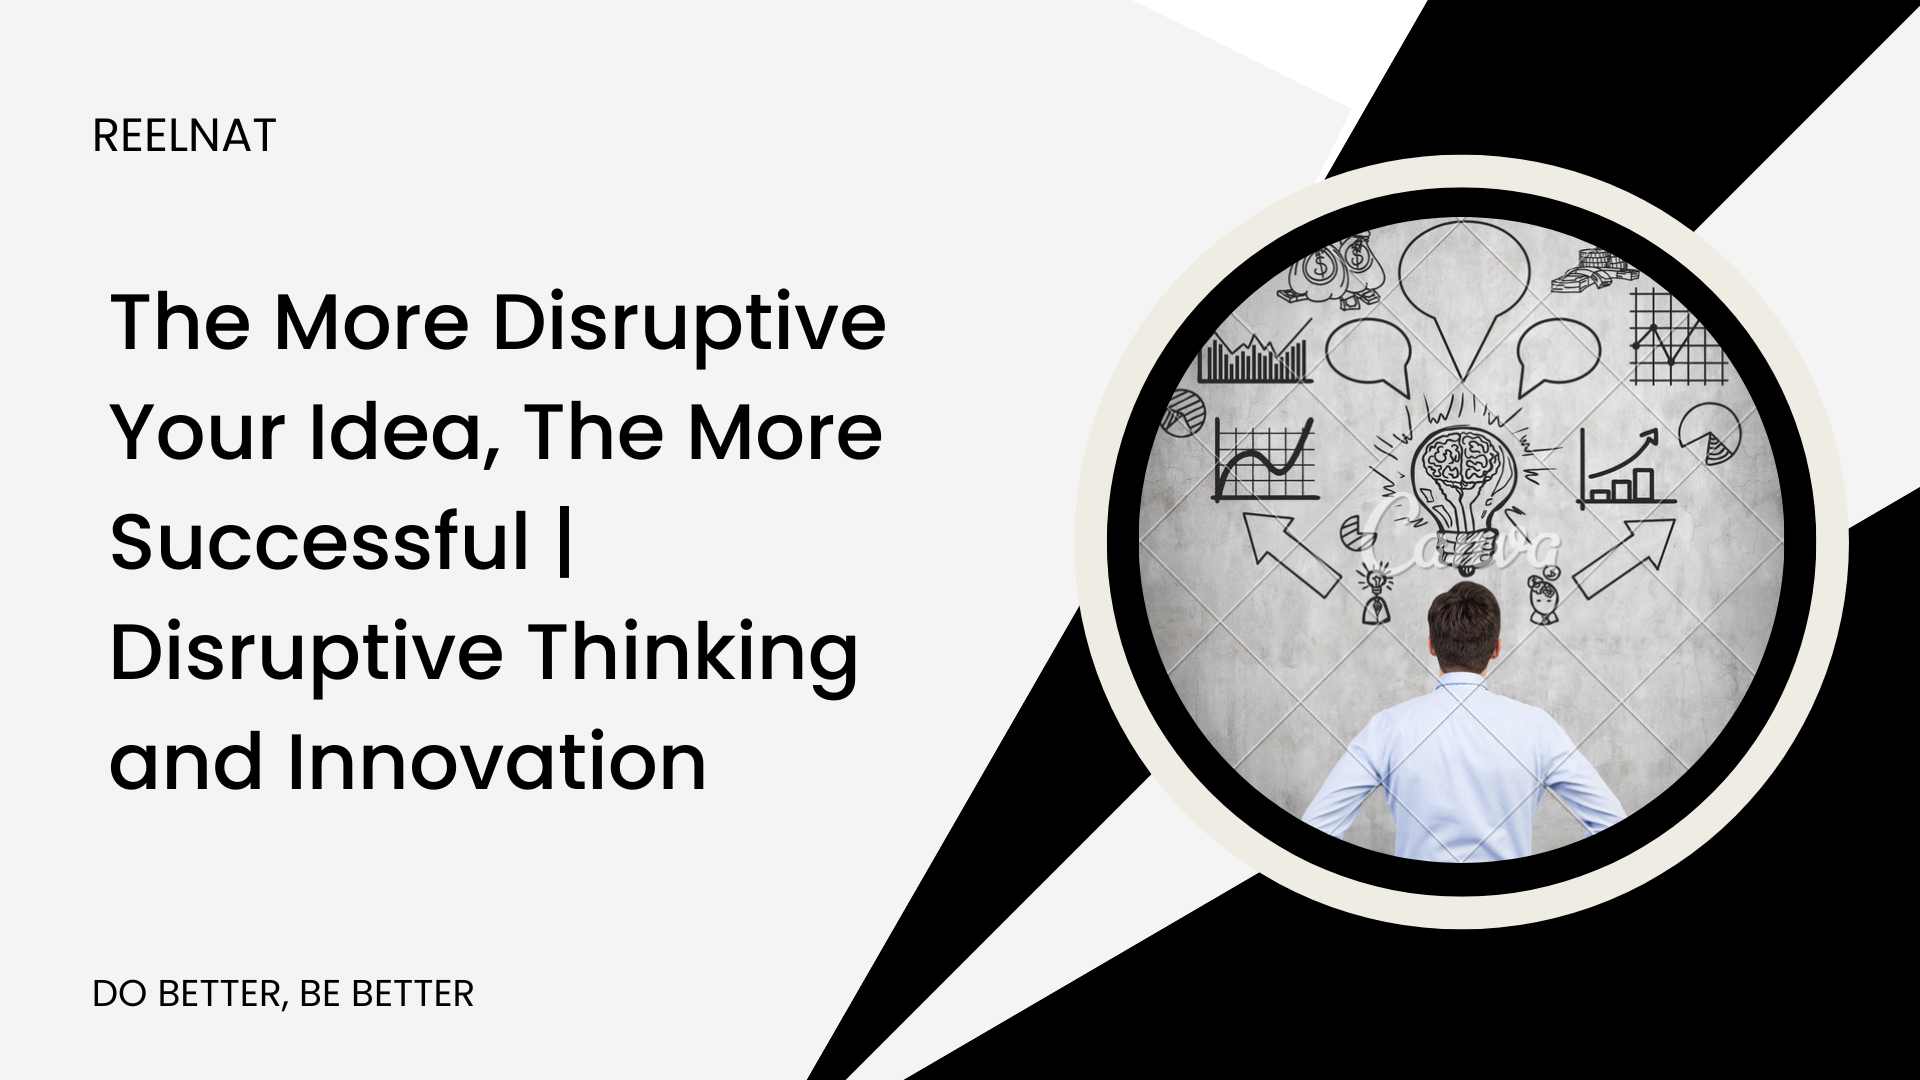 The More Disruptive Your Idea, The More Successful | Disruptive Thinking and Innovation